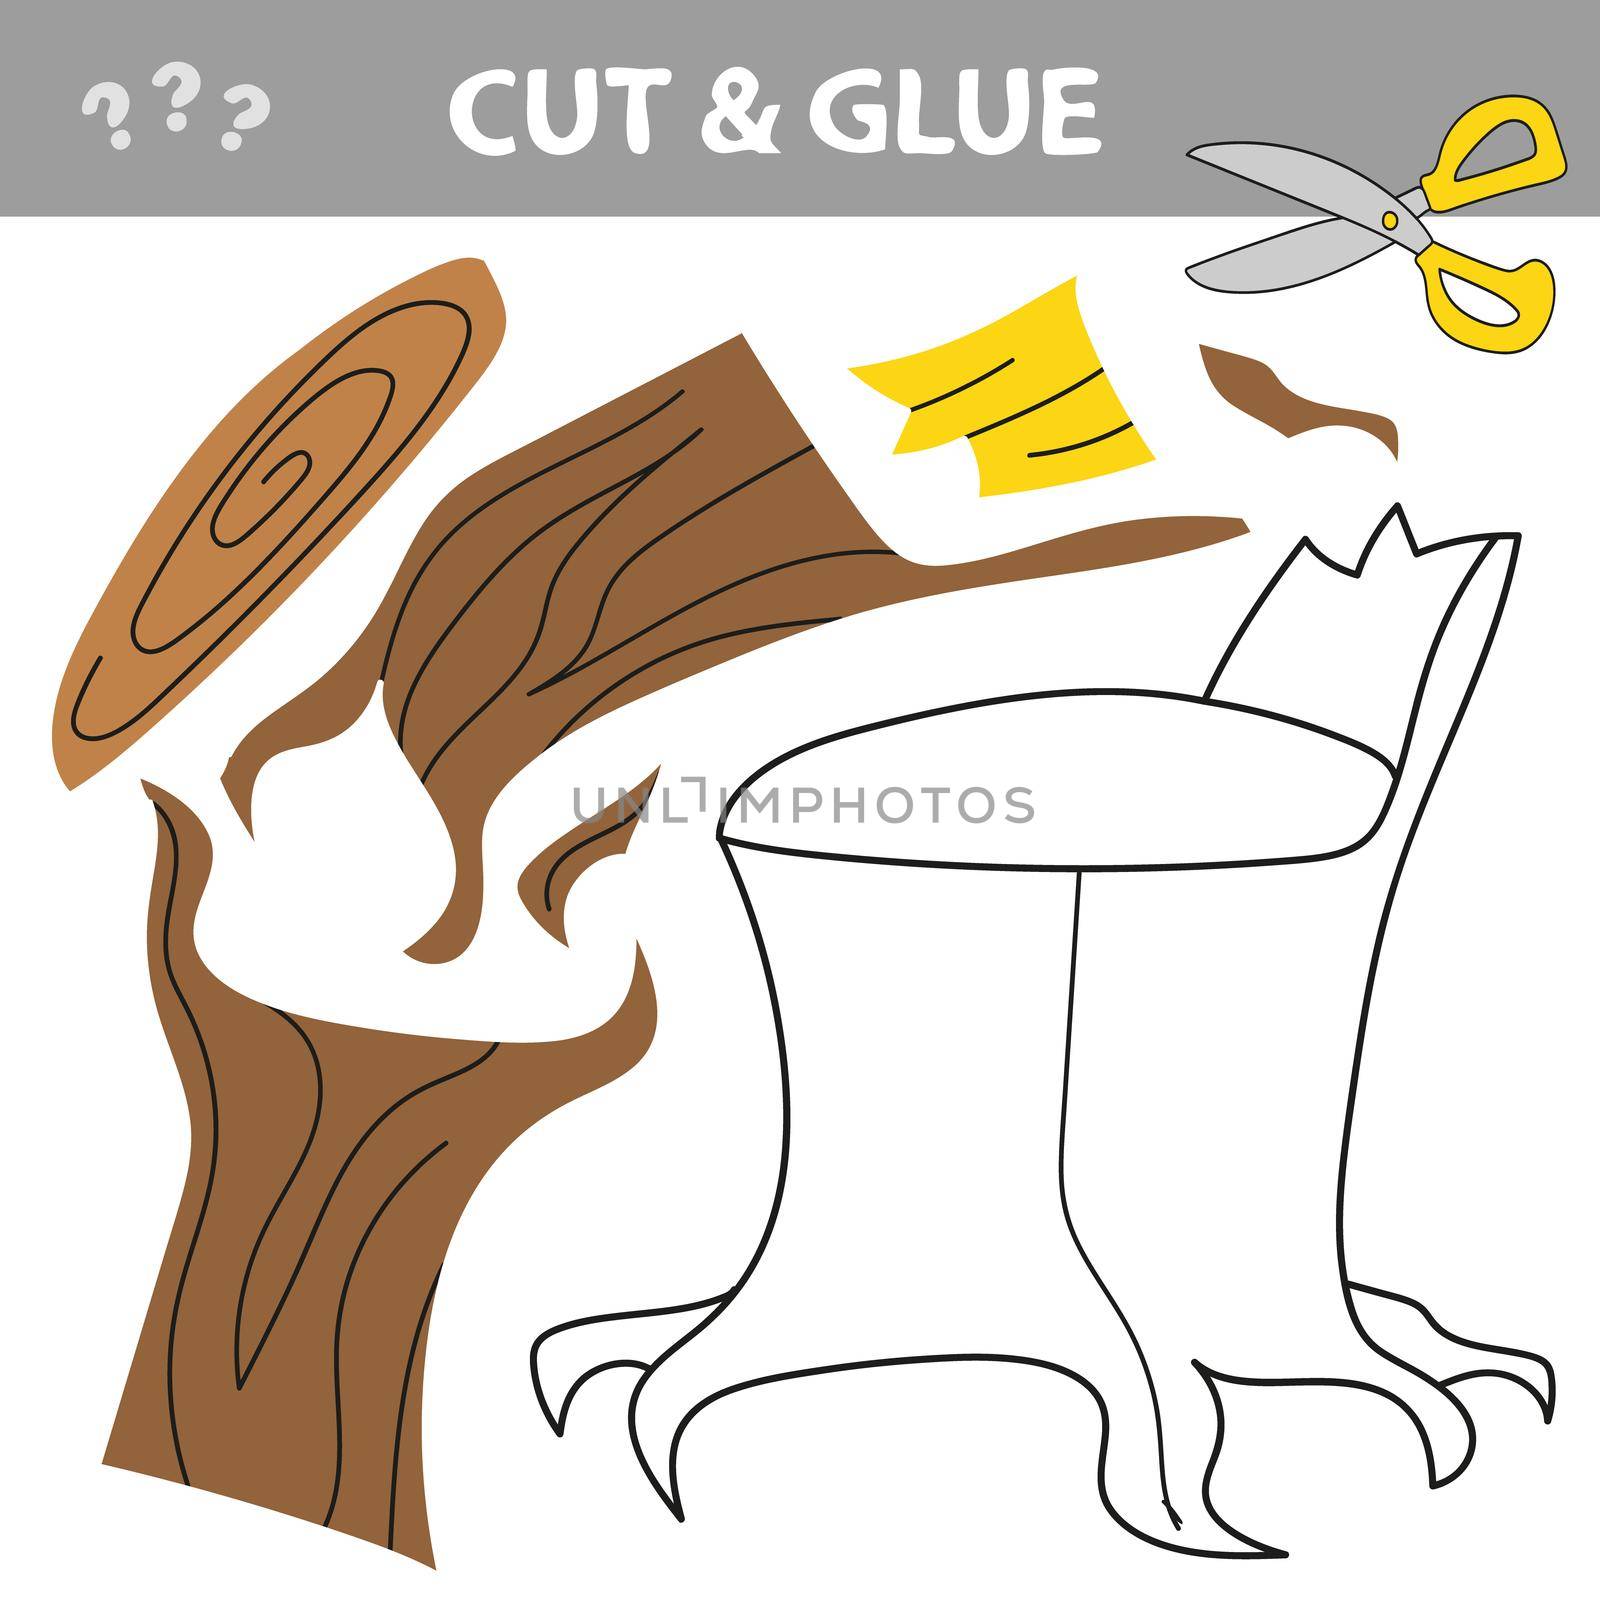 Cut and glue - Simple game for kids. Stump. Easy puzzle game for kids. Use scissors and glue and restore the picture inside the contour.